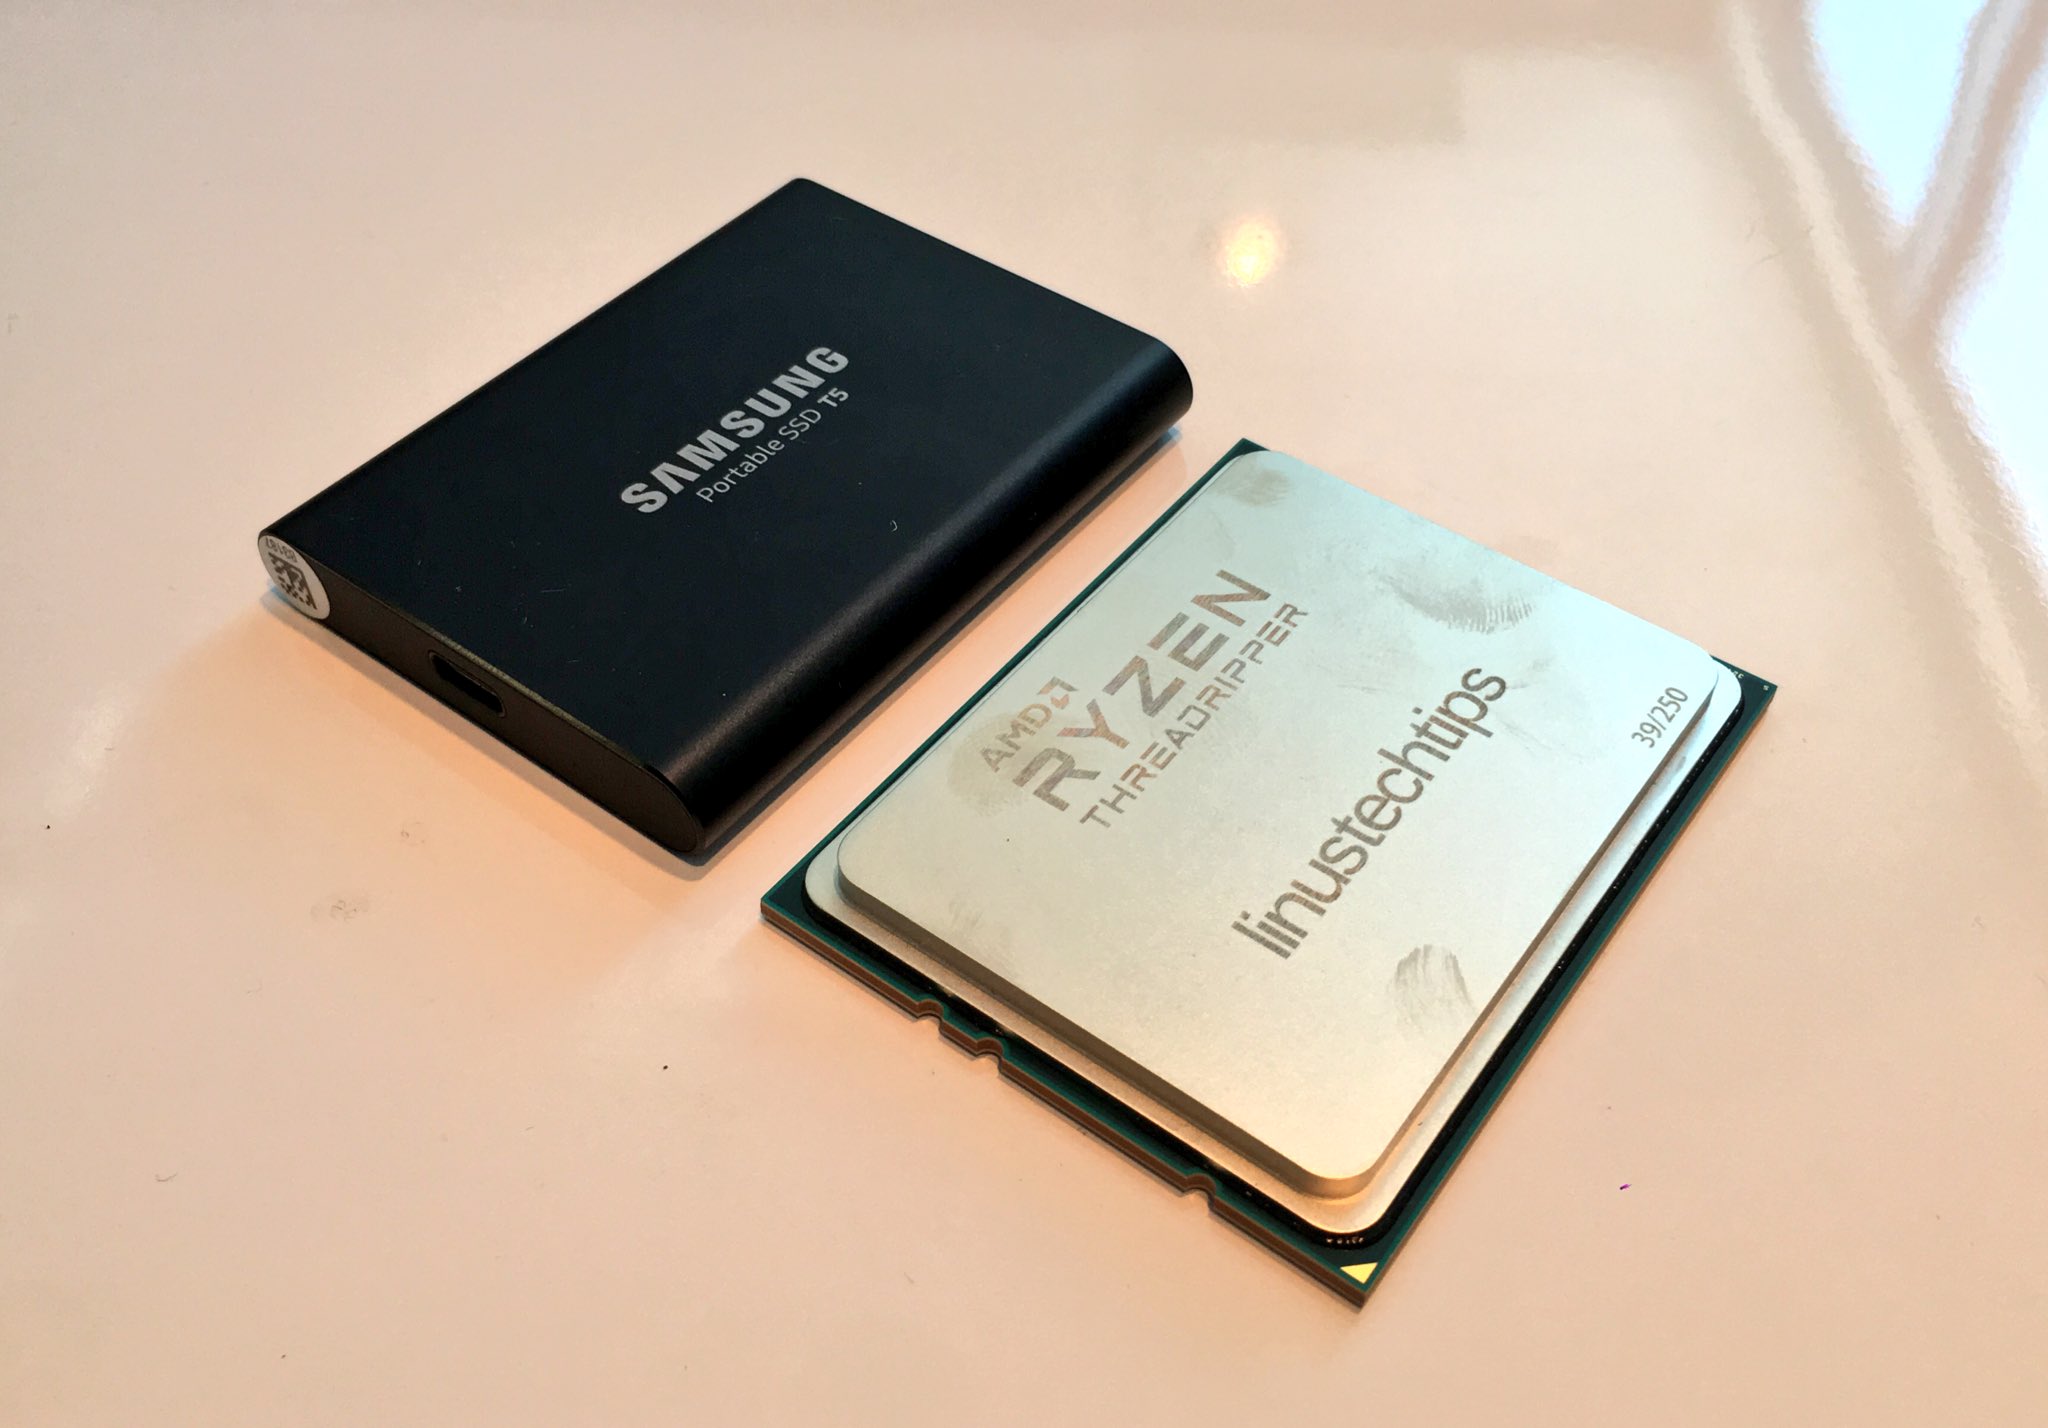 Linus Tech Tips Twitterissä: "The new 1TB SSD from @Samsung, threadripper for reference. https://t.co/MaJpXdM0Oa"